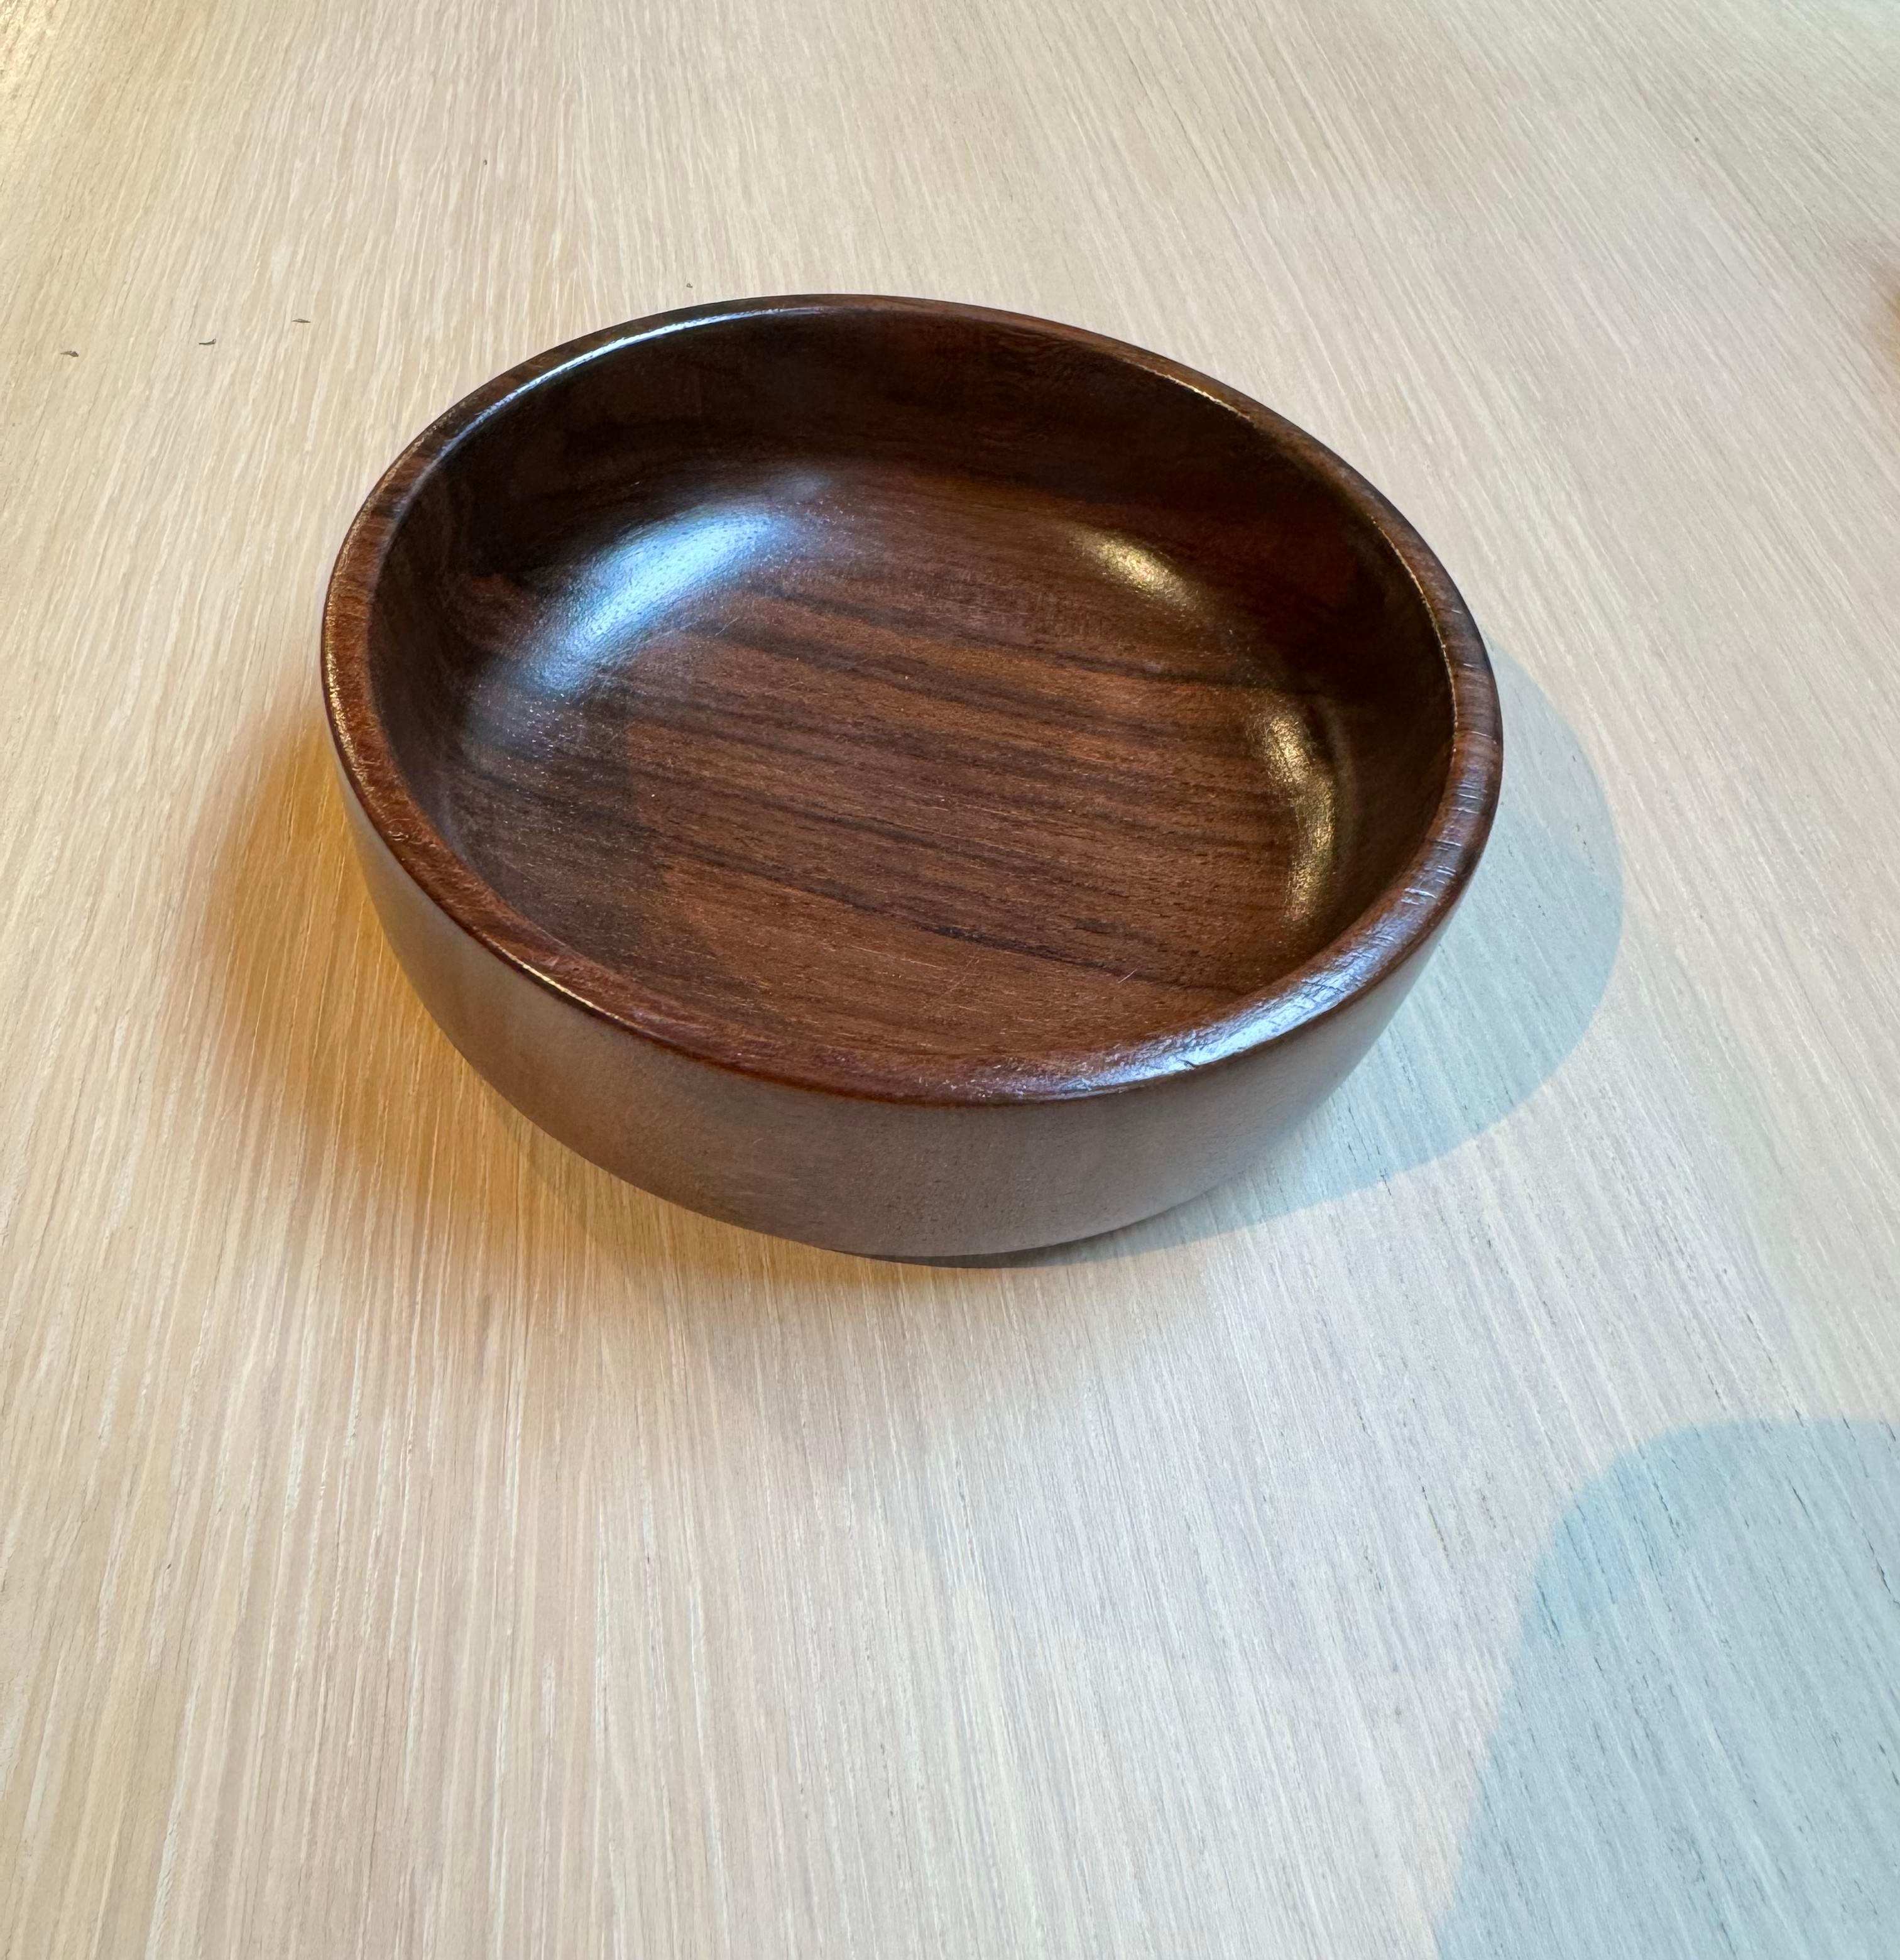 This Brazilian mid century modern bowl, designed by Tropic Art, is absolutely stunning.  Handcrafted with hard rosewood (also known as jacaranda), this bowl has a deep, dark, and rich tone with a stunning natural wood grain. In addition, the wood